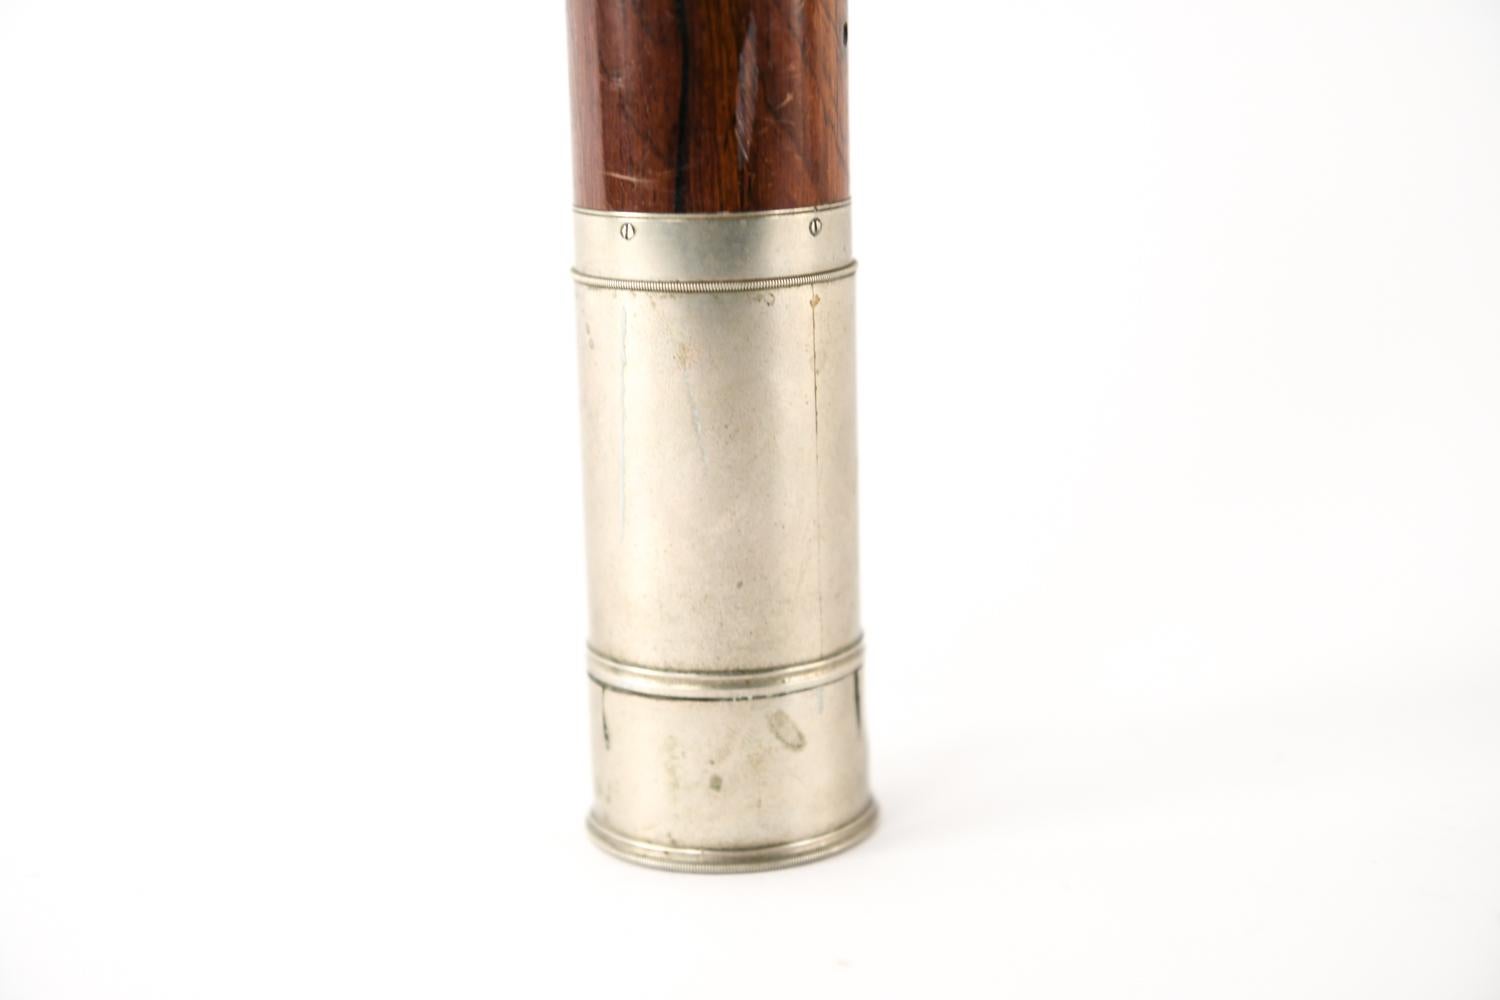 Mid-19th Century D.E. Wood Inscribed Nautical Telescope & Compass with Rosewood Barrel, c. 1860s